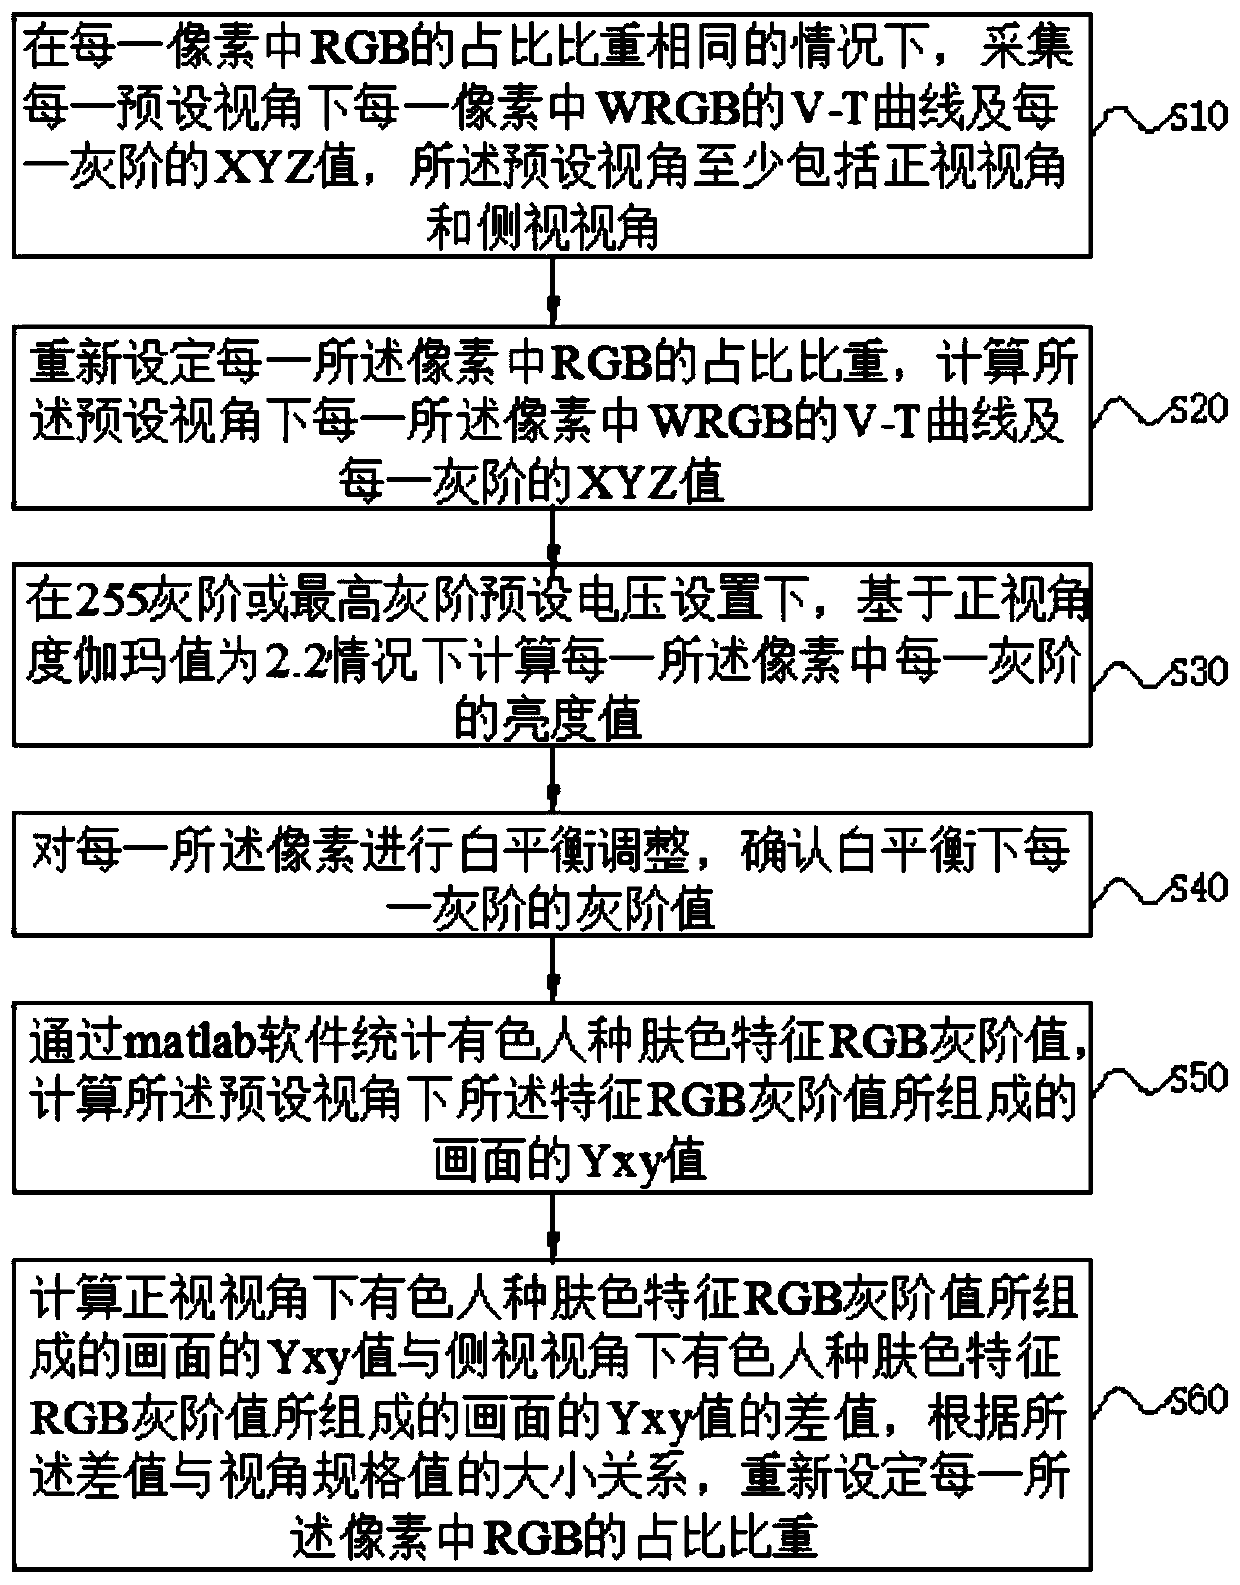 Design method and system for improving skin color visual angle performance of colored person